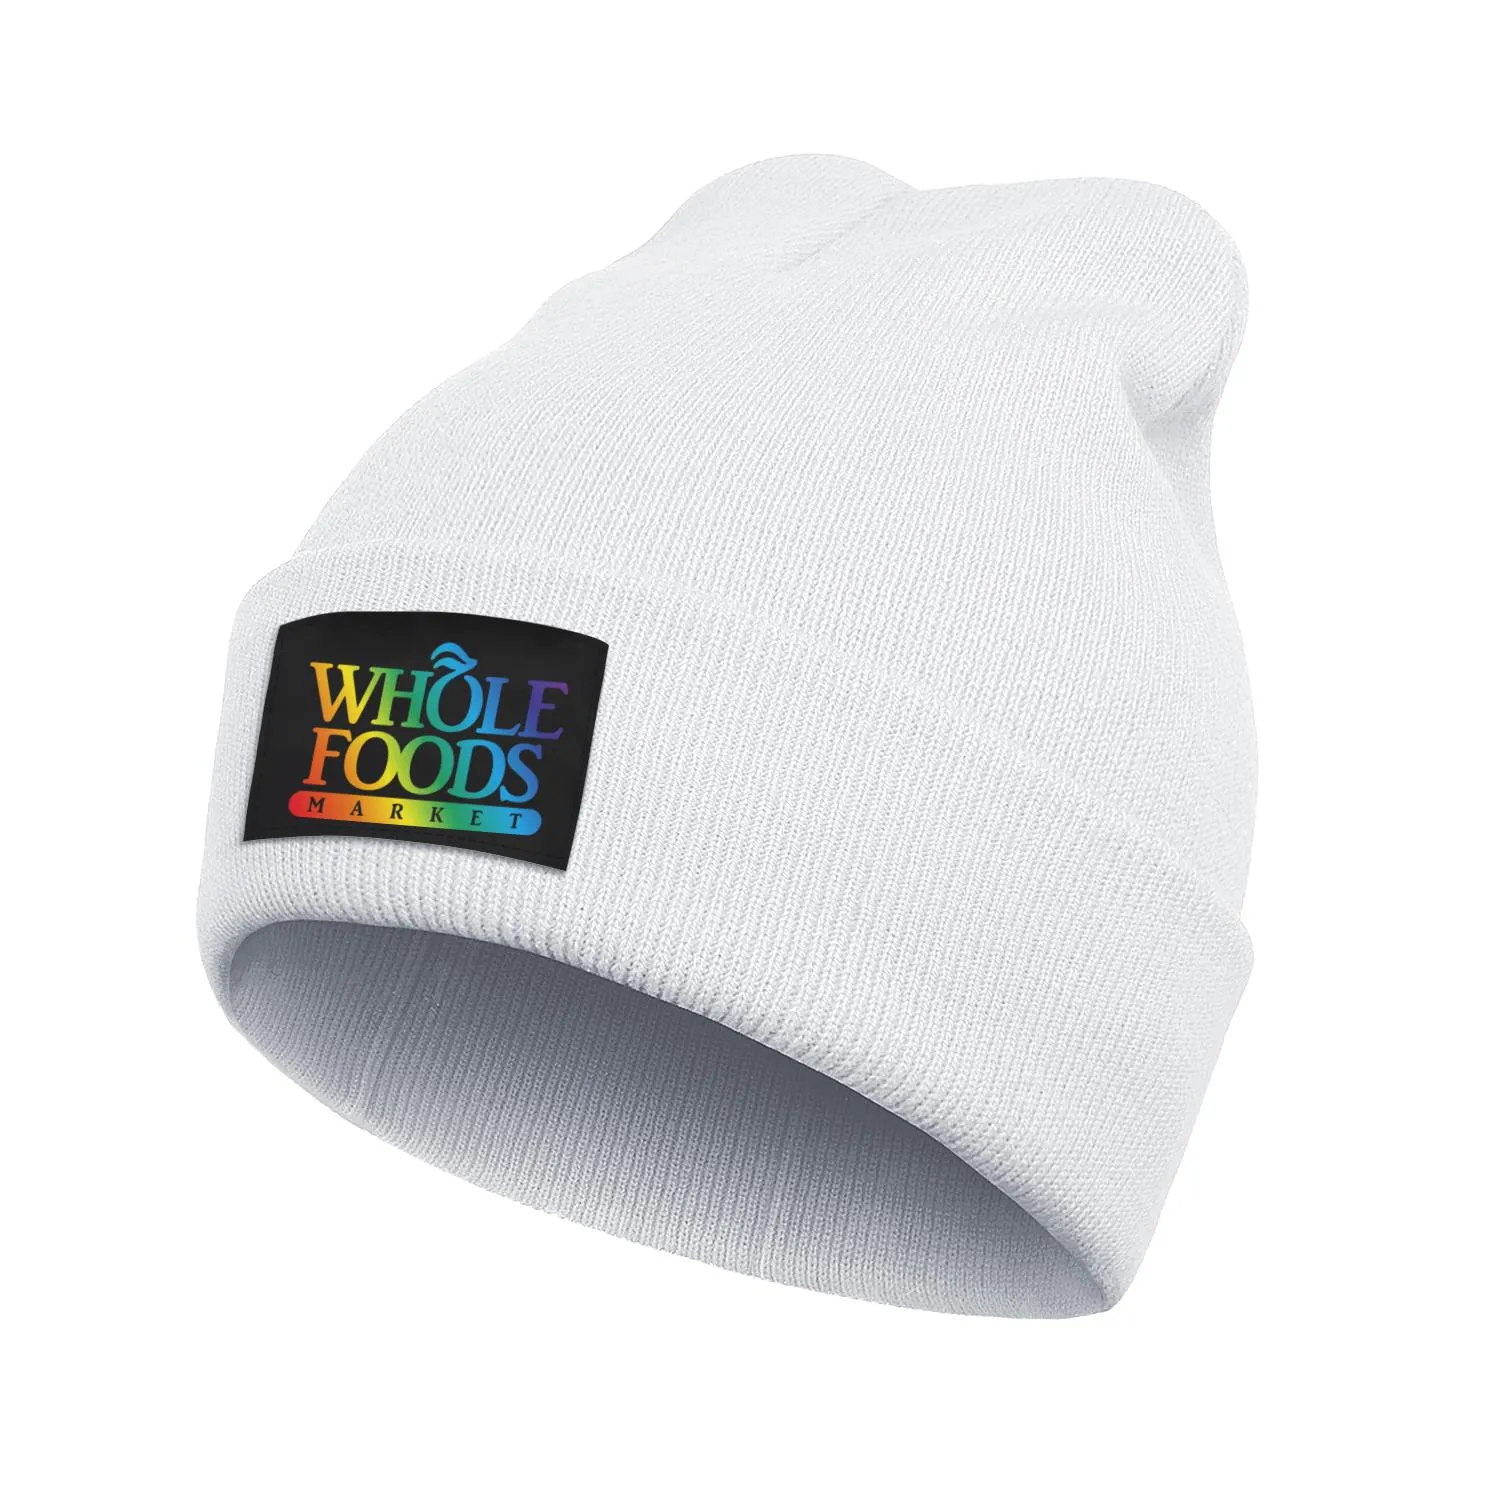 Mode Whole Foods Market Flash Gold Winter Ski Watch Beanie Hat Vintage Hats Organic Food Healthy Pink8734941